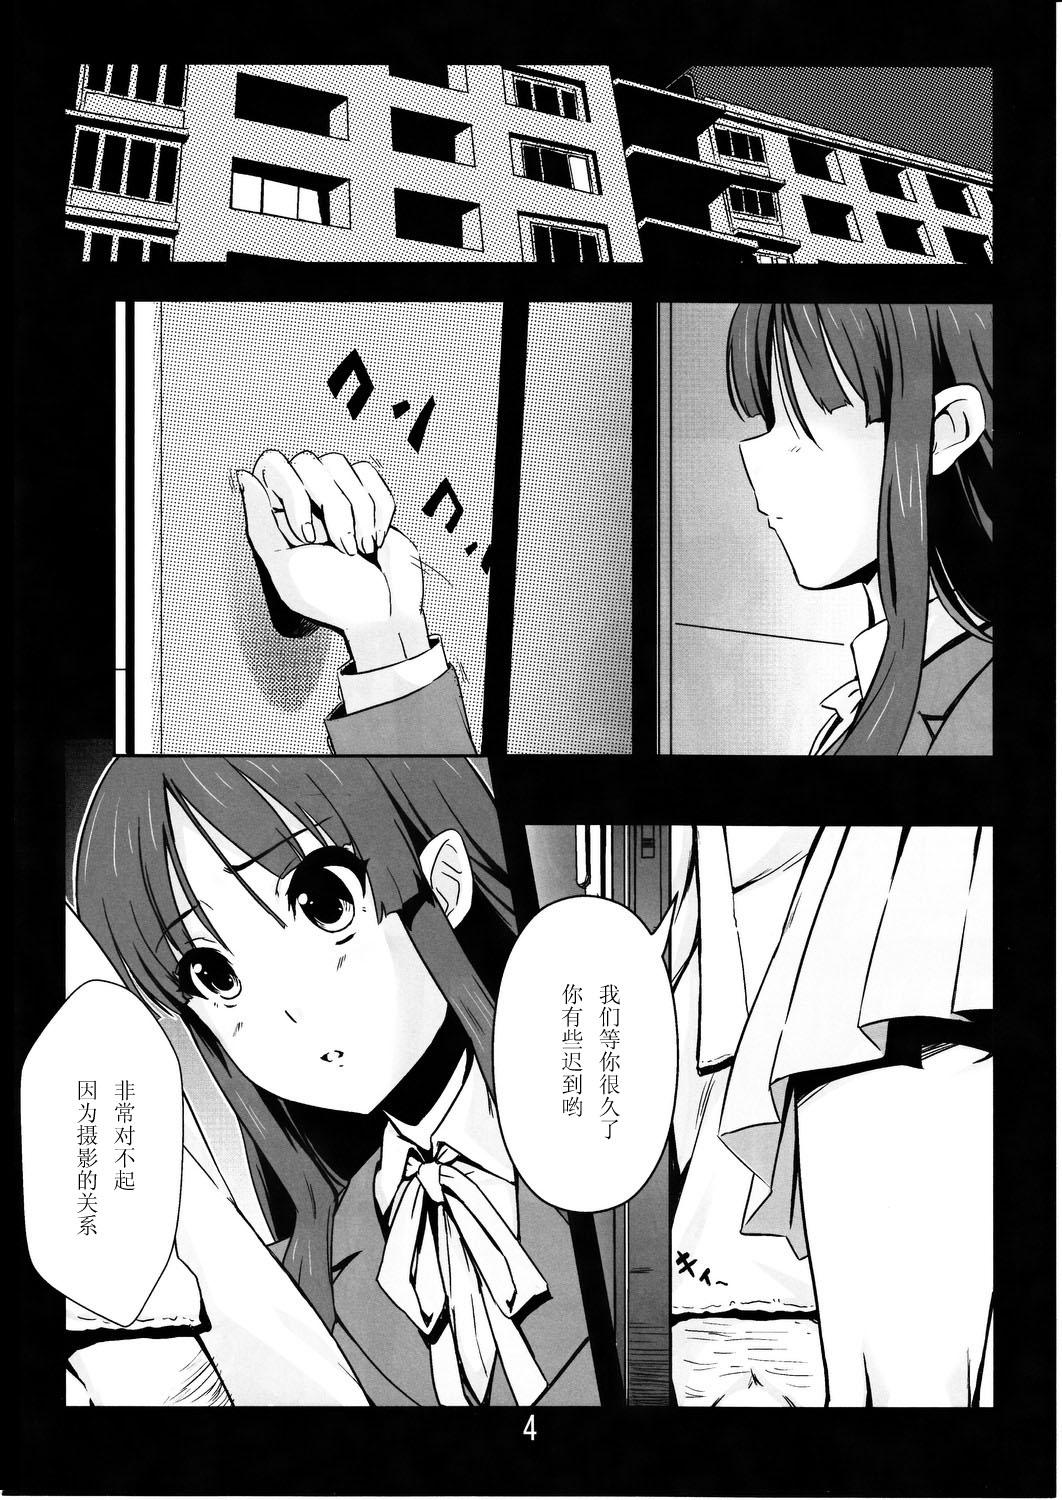 Stepdad Listen to me! - K-on Rough Porn - Page 3